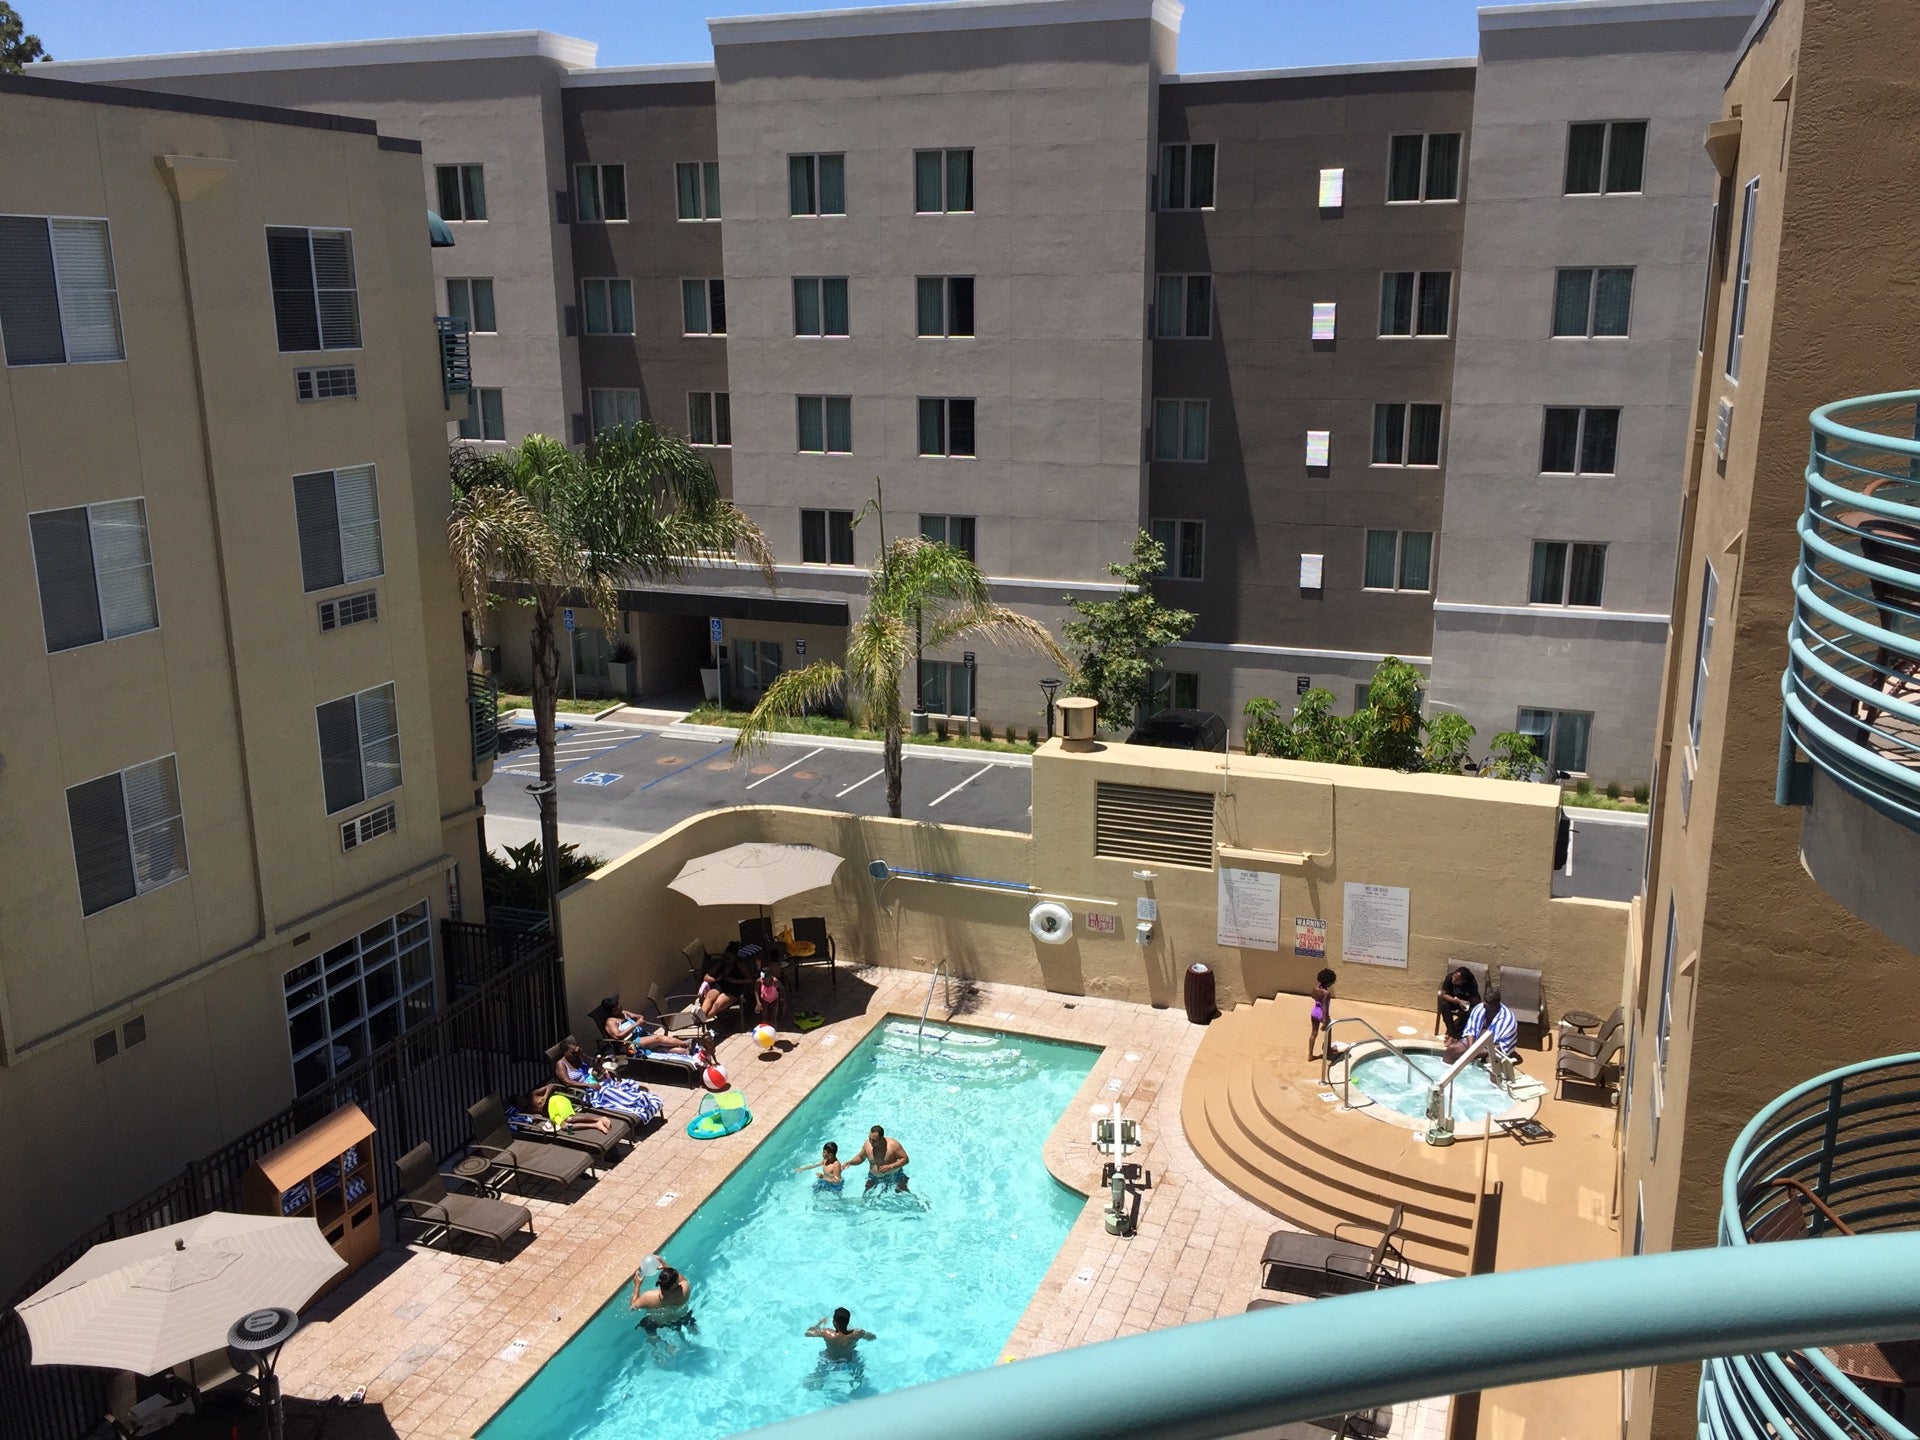 WorldMark Mission Valley - San Diego, CA - Official Site